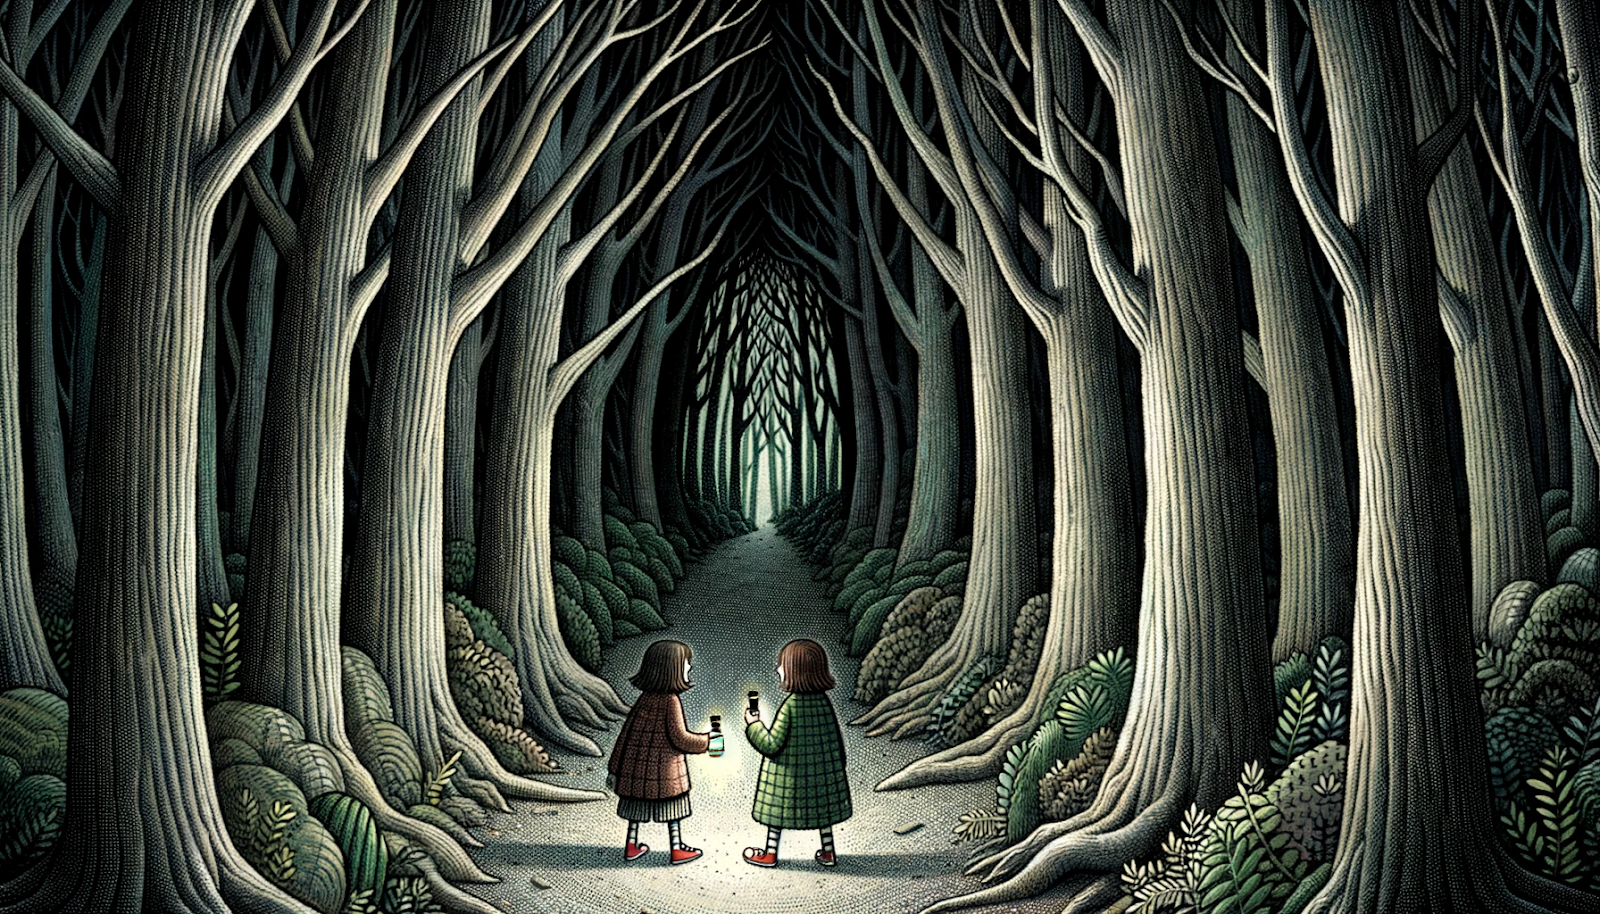 Illustration of a dense, dark forest known as the Whispering Woods. Erin and her friend Mia, both holding small flashlights, stand at the entrance, looking into the eerily inviting pathway. Tall trees huddle together, and the occasional whisper floats through the trees.